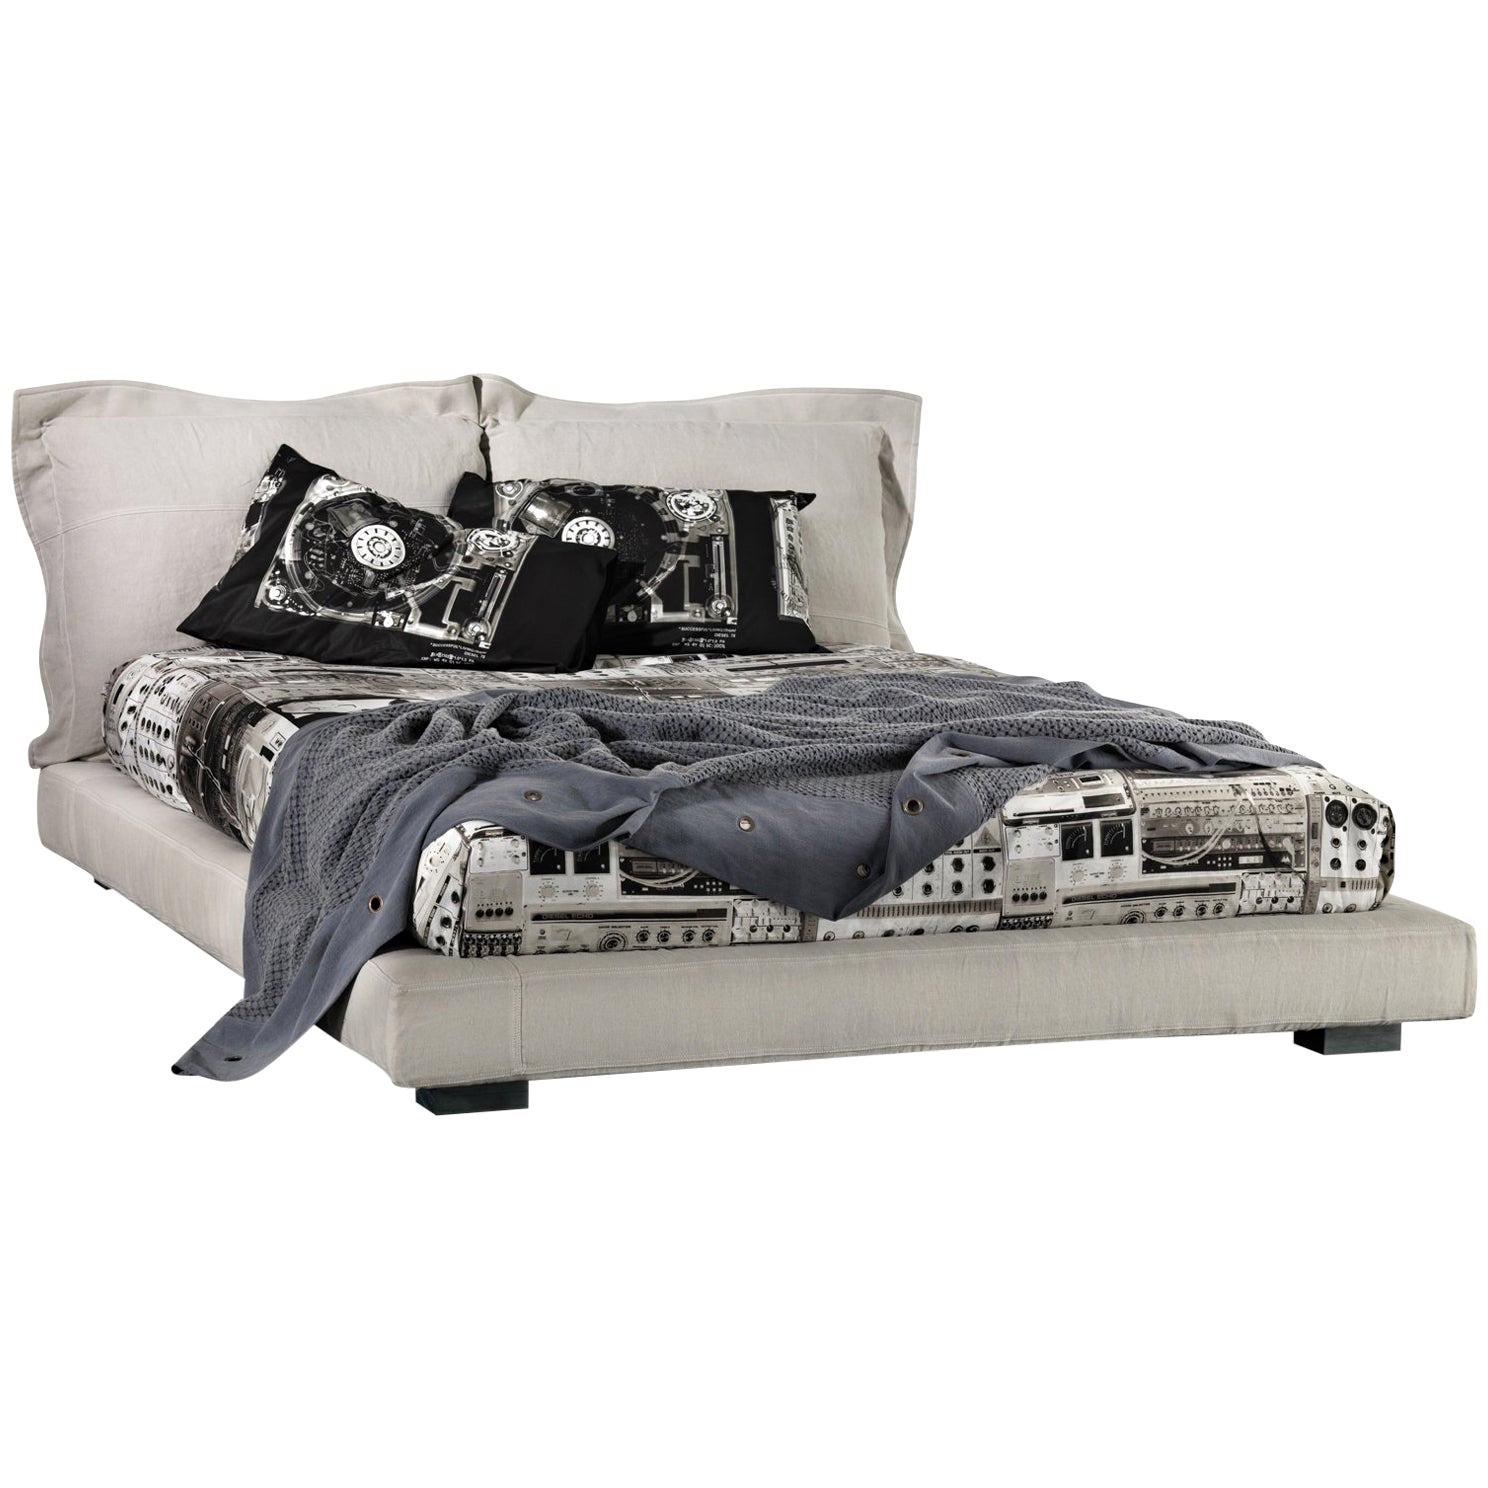 "Nebula Five 170" Cotton Linen Leather or Velvet Double Bed by Moroso for Diesel For Sale